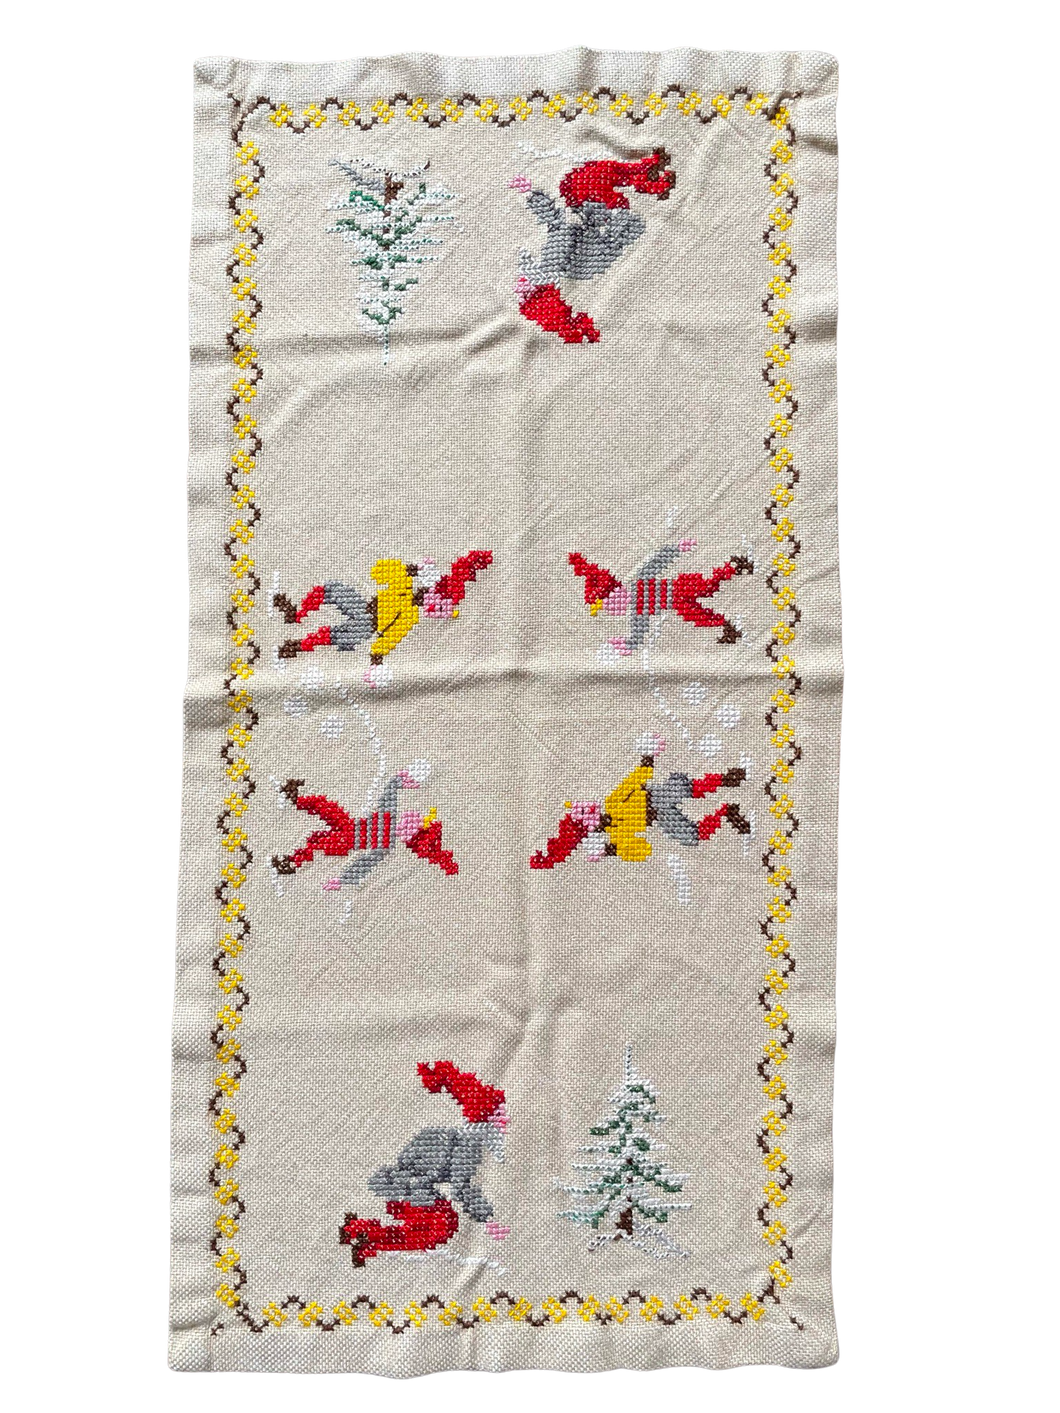 Vintage midcentury Swedish Christmas hand-embroidered table cloth or runner featuring elves having a snowball fight - Moppet